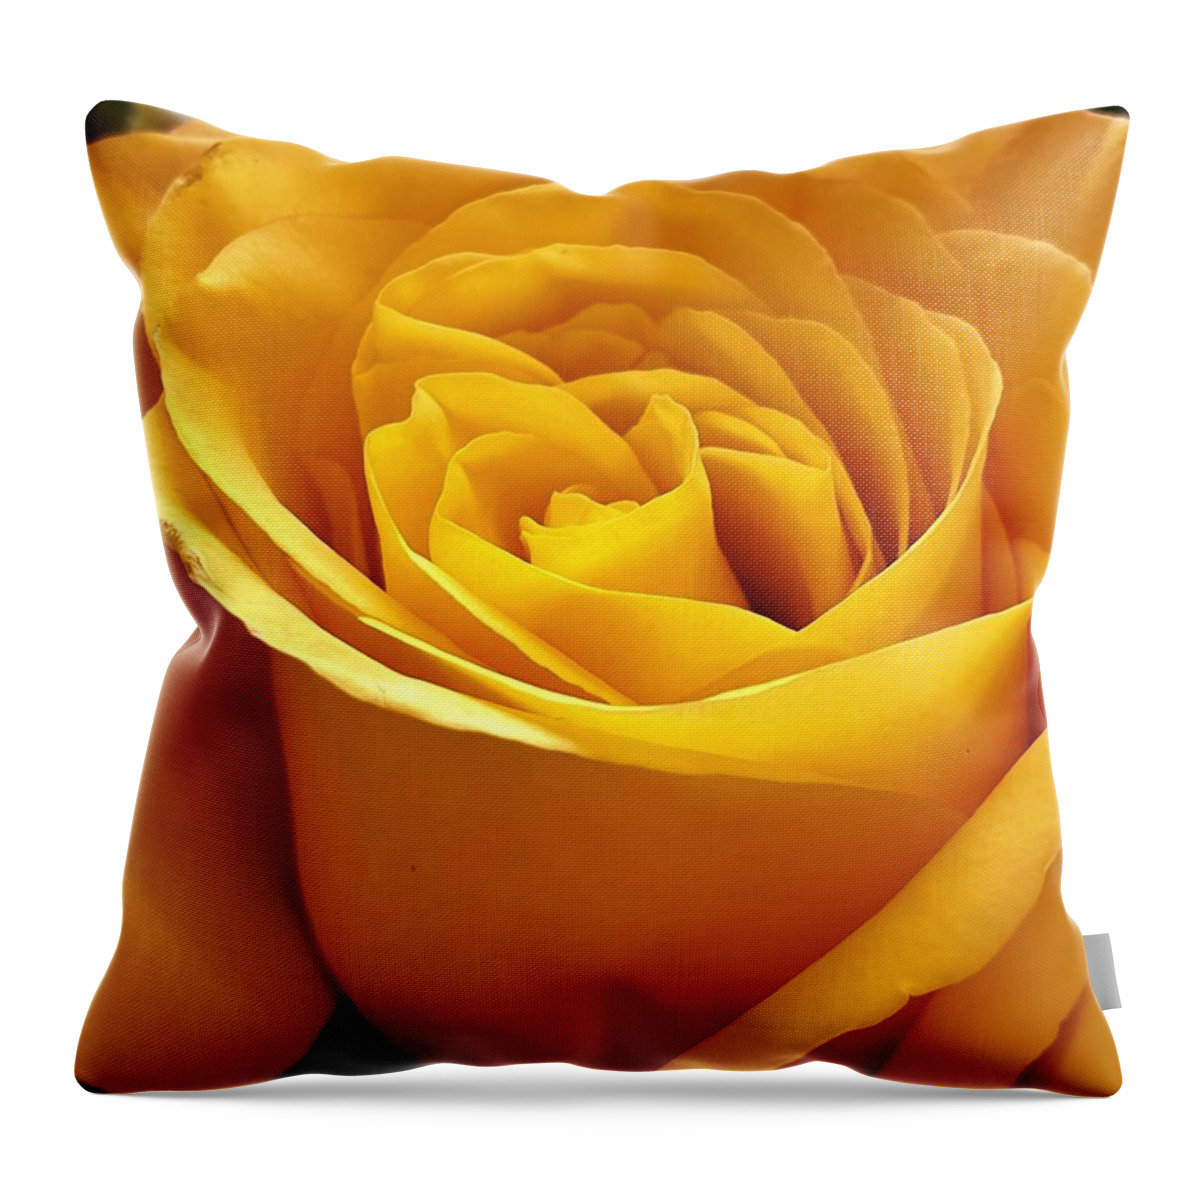 Rose Throw Pillow featuring the photograph Rose Light by Andrea Whitaker